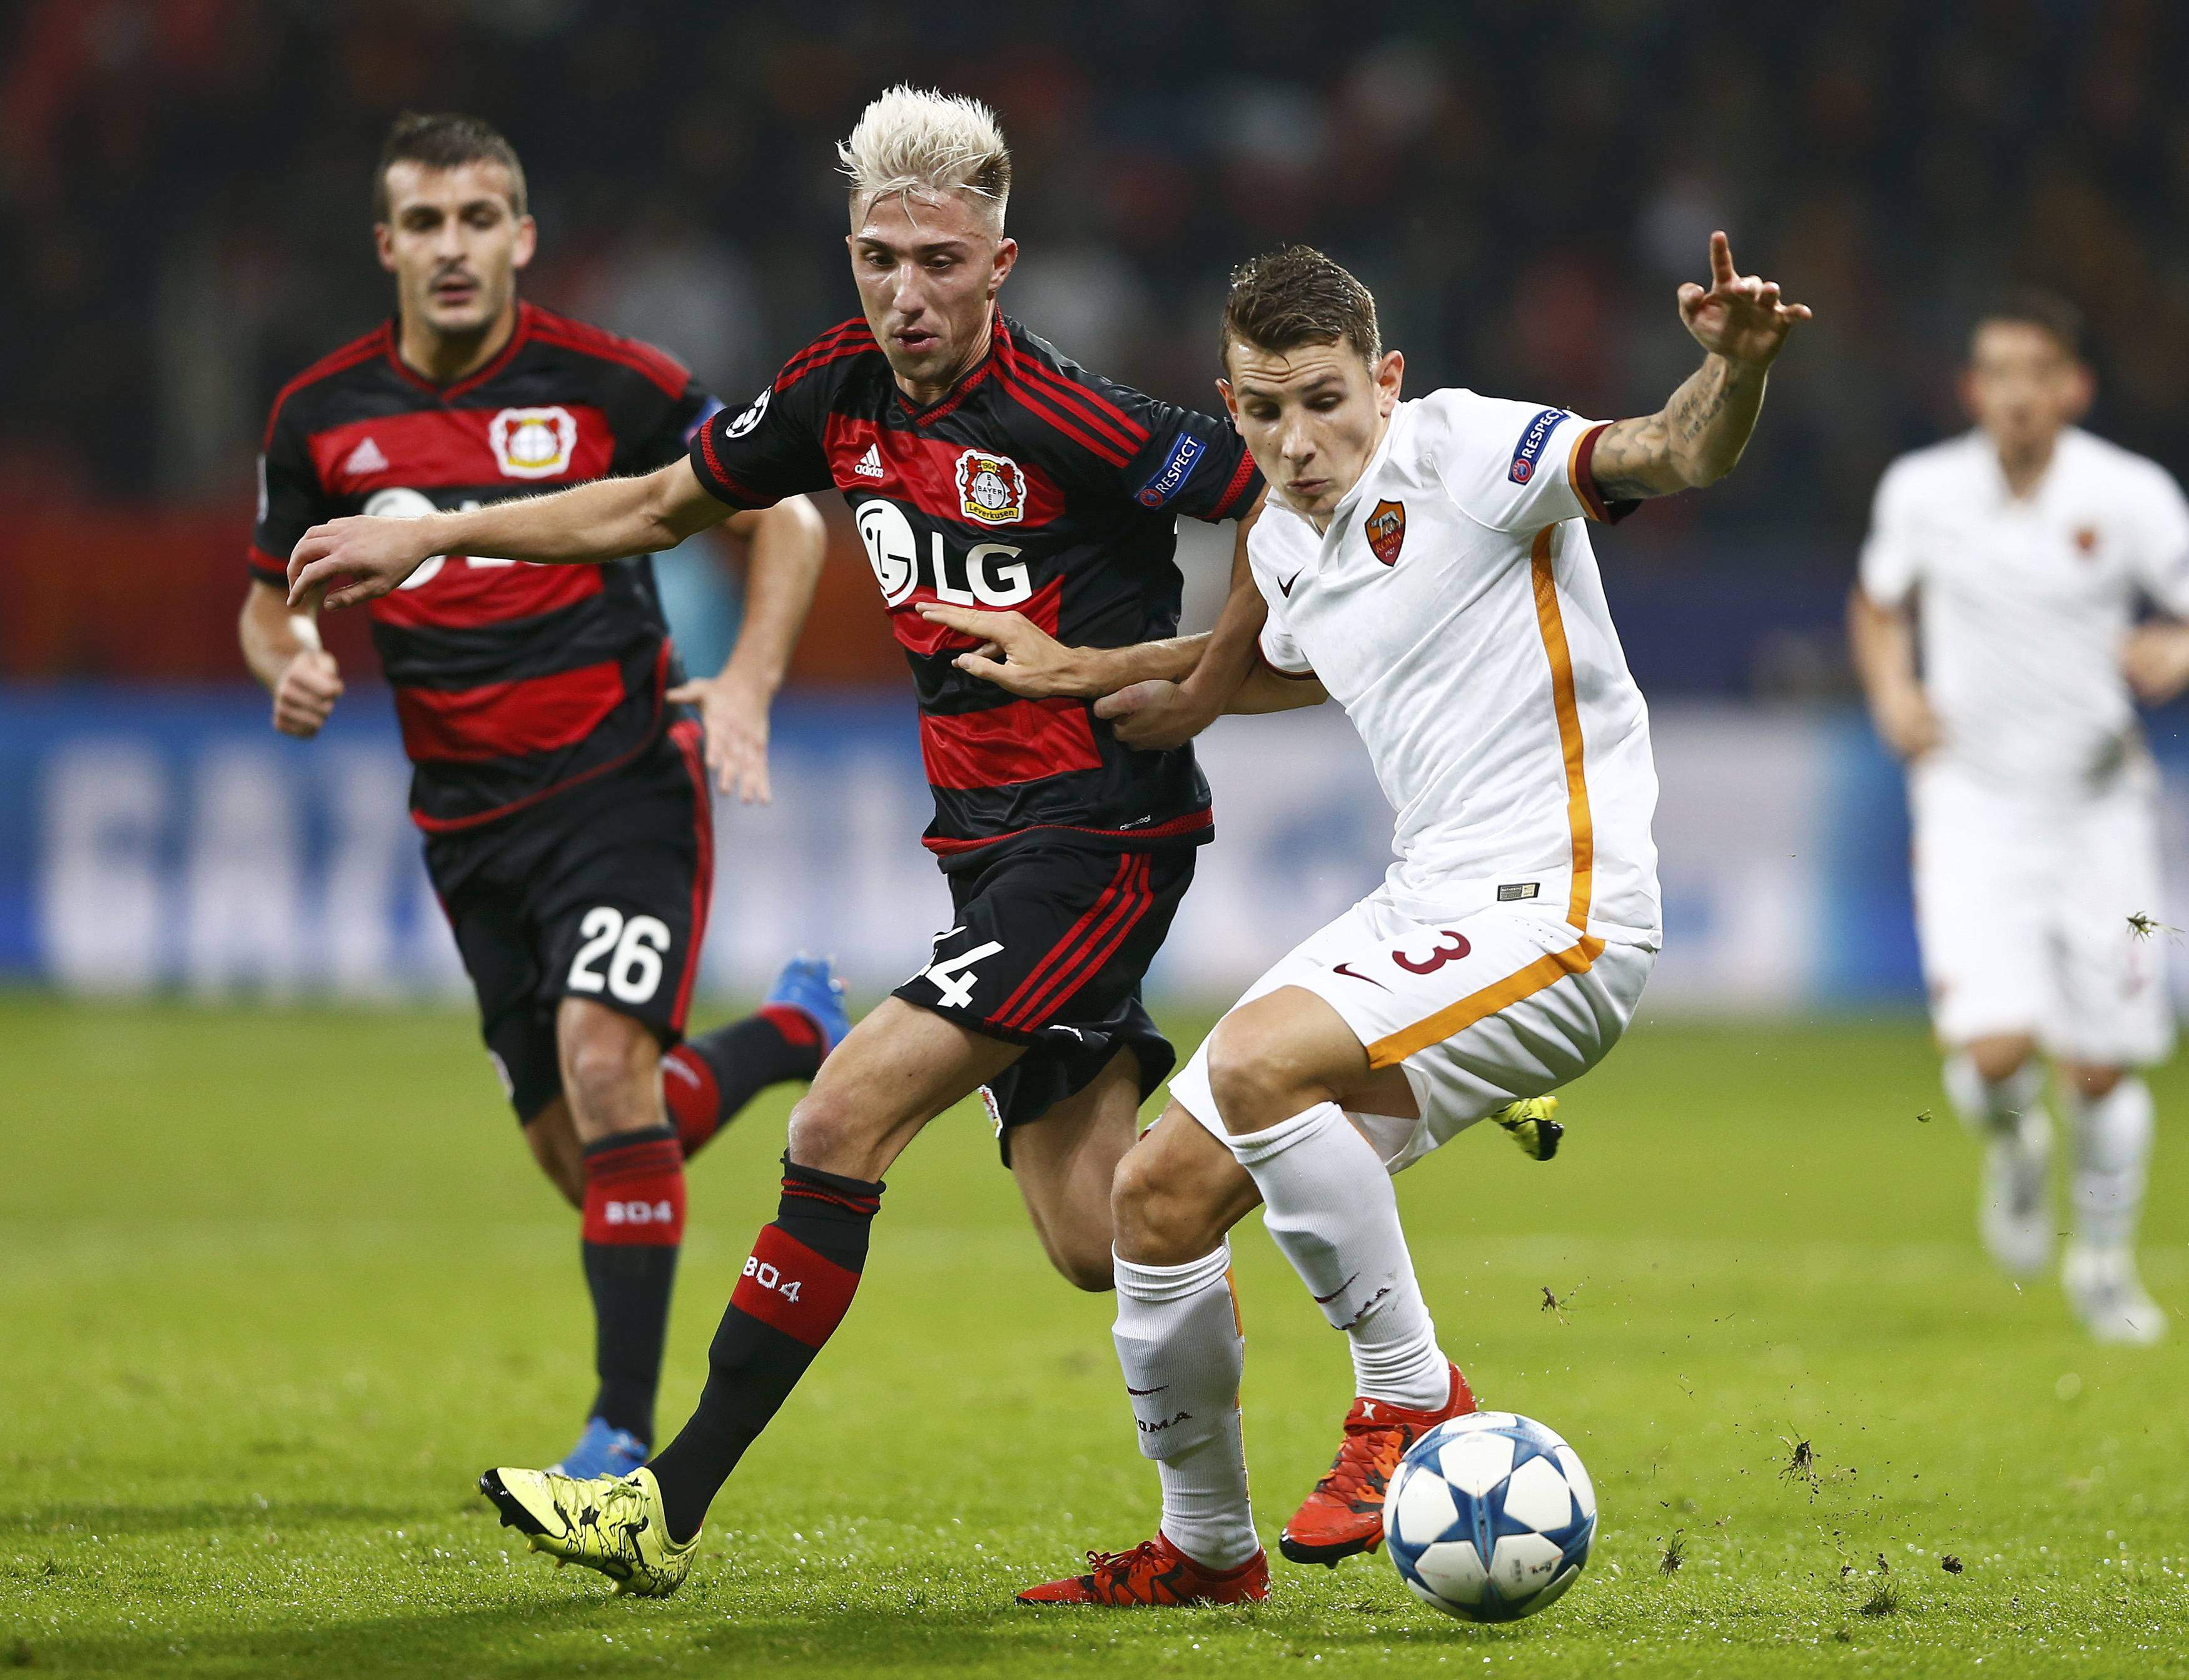 Leverkusen's Kevin Kampl (L) and Roma's Lucas Digne fight for the ball during their Champions League group E soccer match in Leverkusen, Germany, October 20, 2015. REUTERS/Wolfgang Rattay